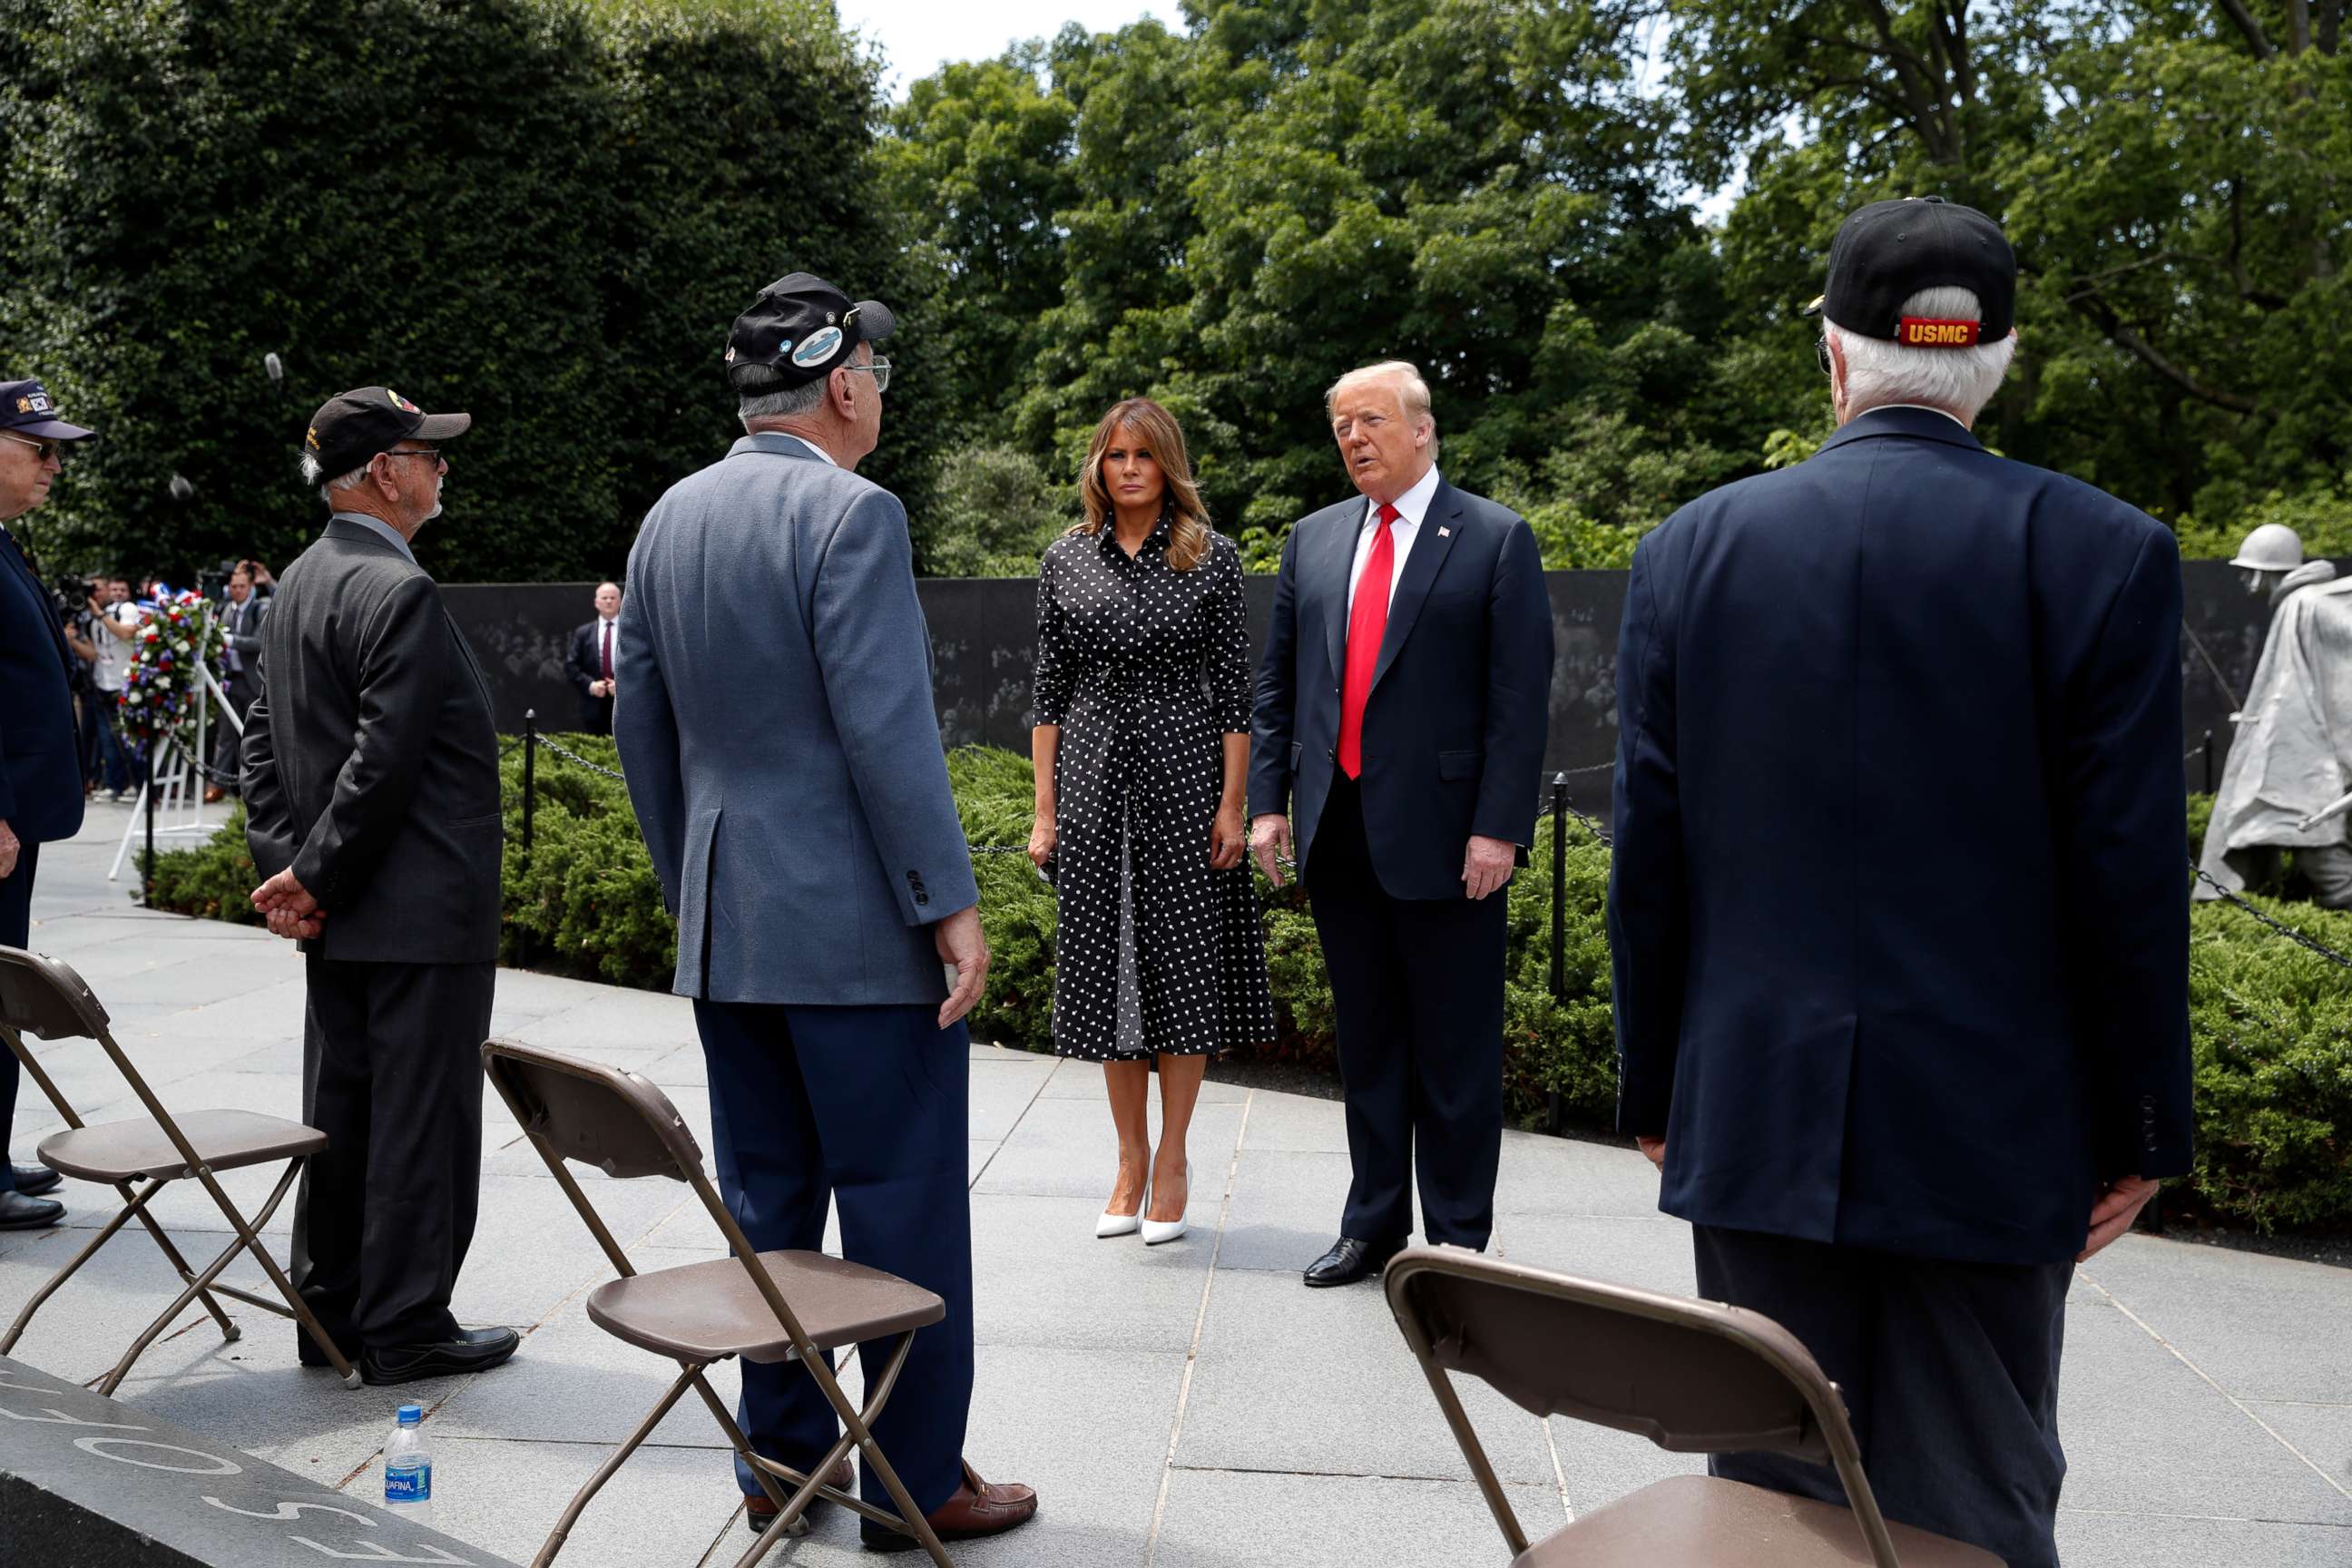 PHOTO: President Donald Trump, accompanied by first lady Melania Trump, speaks with veterans after a wreath placing ceremony at the Korean War Veterans Memorial, Thursday, June 25, 2020, in Washington.